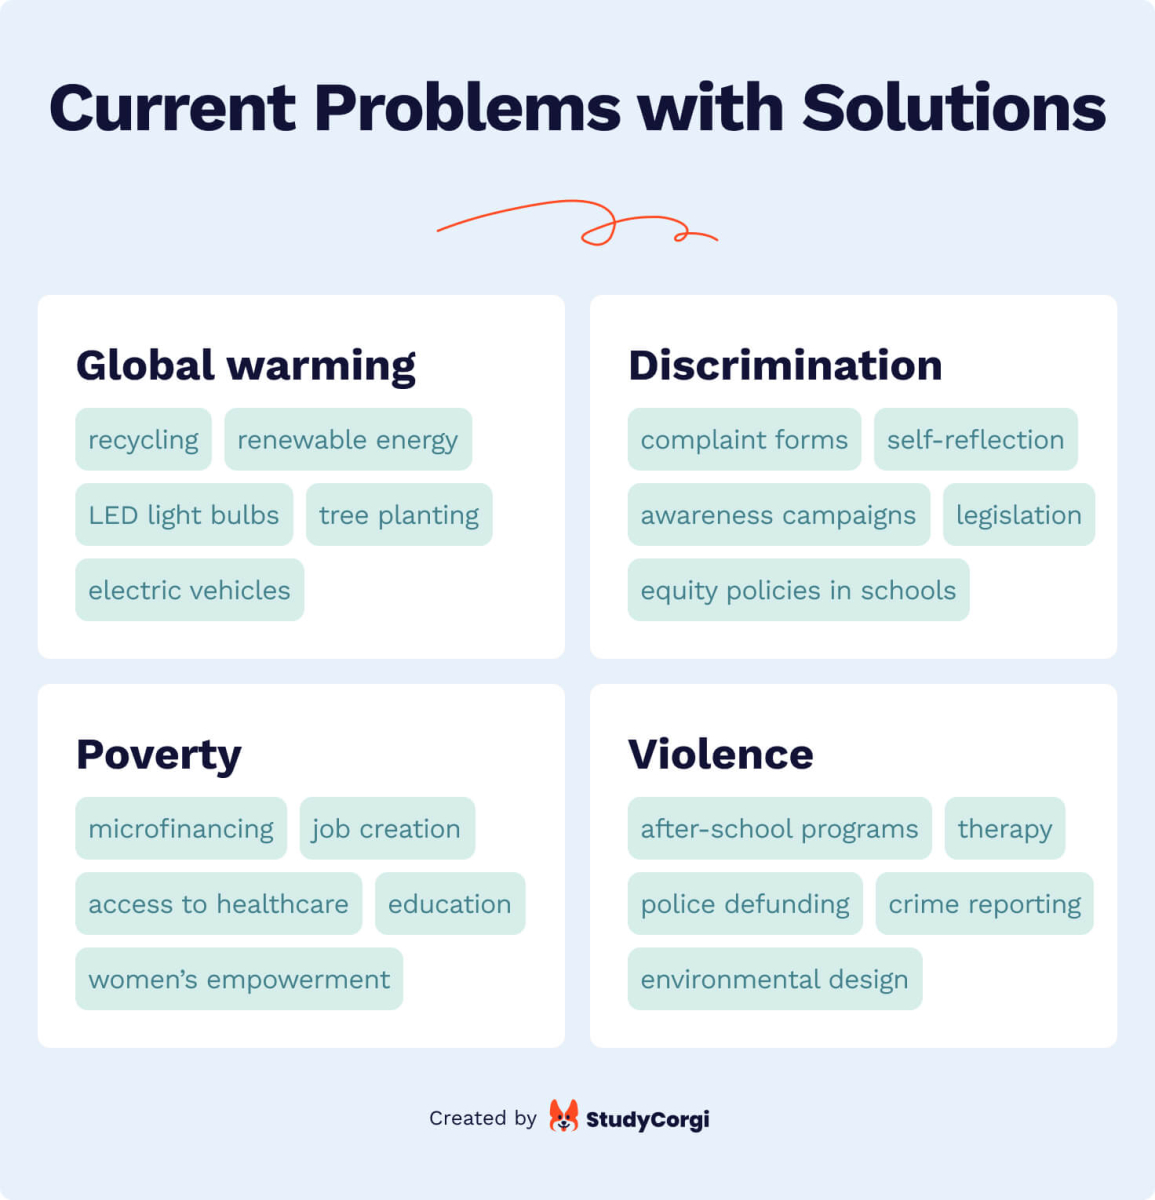 This image shows current problems with possible solutions.